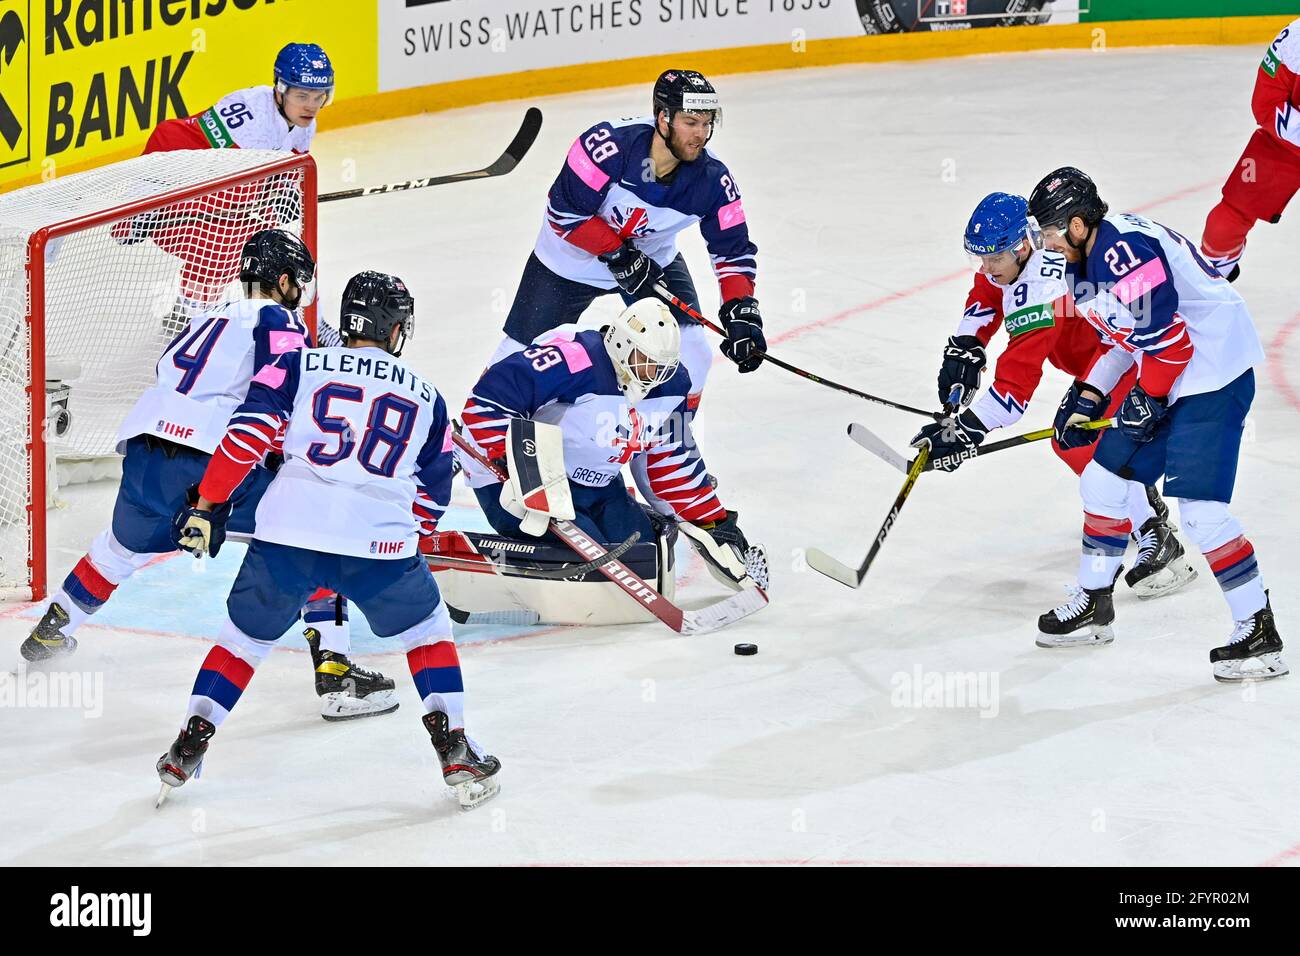 Riga, Latvia. 29th May, 2021. From left Matej Blumel (CZE), Liam Kirk (GB), David Clements (GB), Ben Bowns (GB), Ben O'Connor (GB), David Sklenicka (CZE), Mike Hammond (GB) in action during the 2021 IIHF Ice Hockey World Championship, Group A match Great Britain vs Czech Republic, played in Riga, Latvia, on May 29, 2021. Credit: Vit Simanek/CTK Photo/Alamy Live News Stock Photo